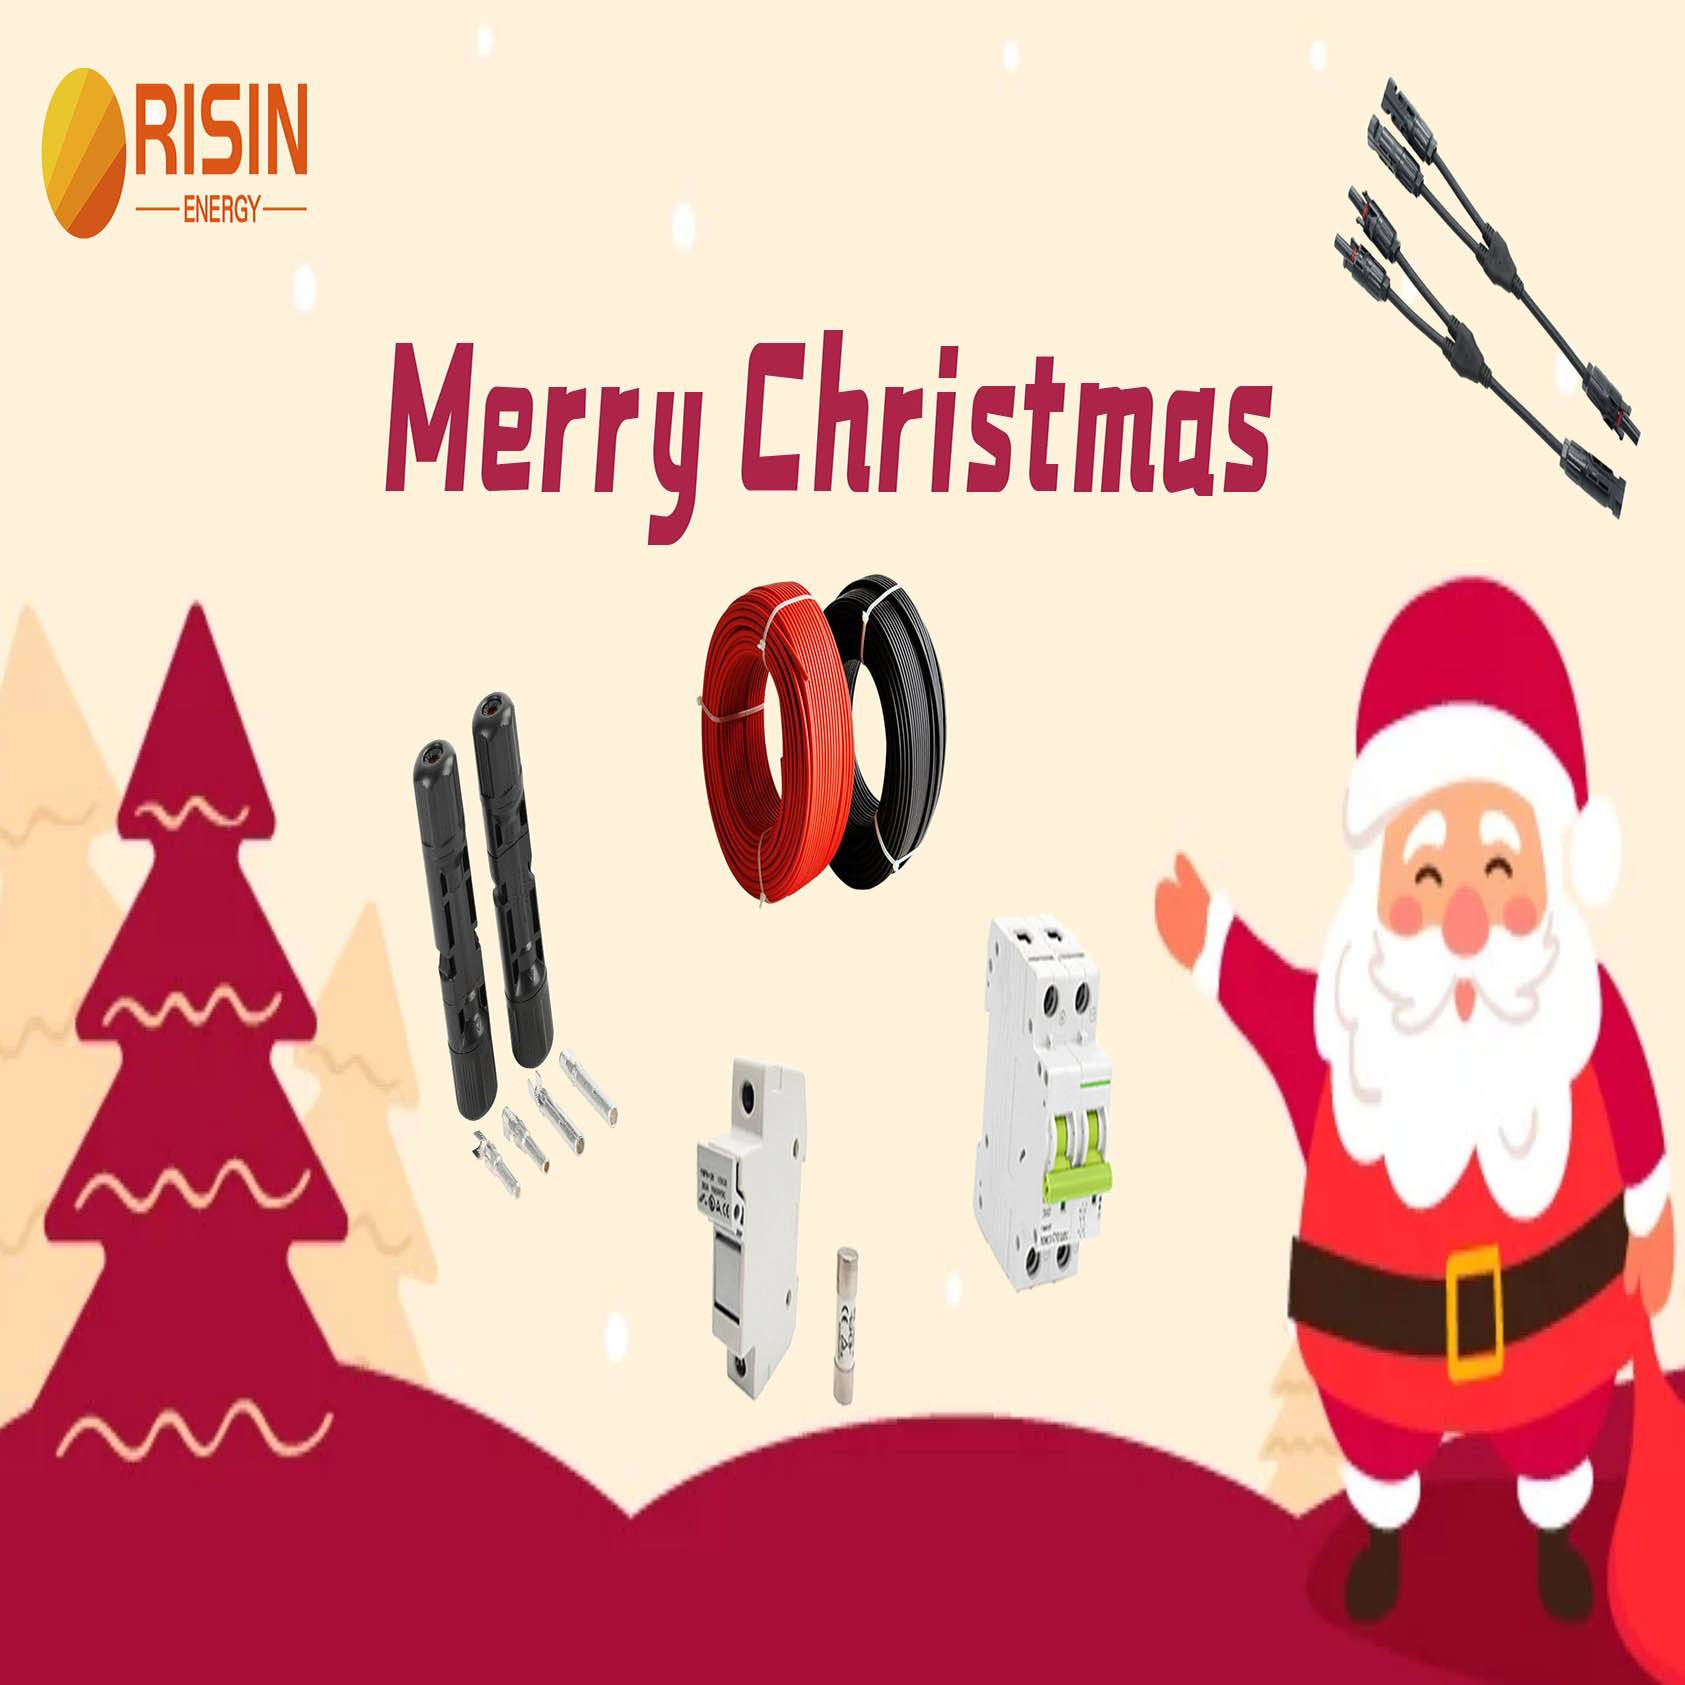 Merry Christmas to all Risin partners in the new year 2021